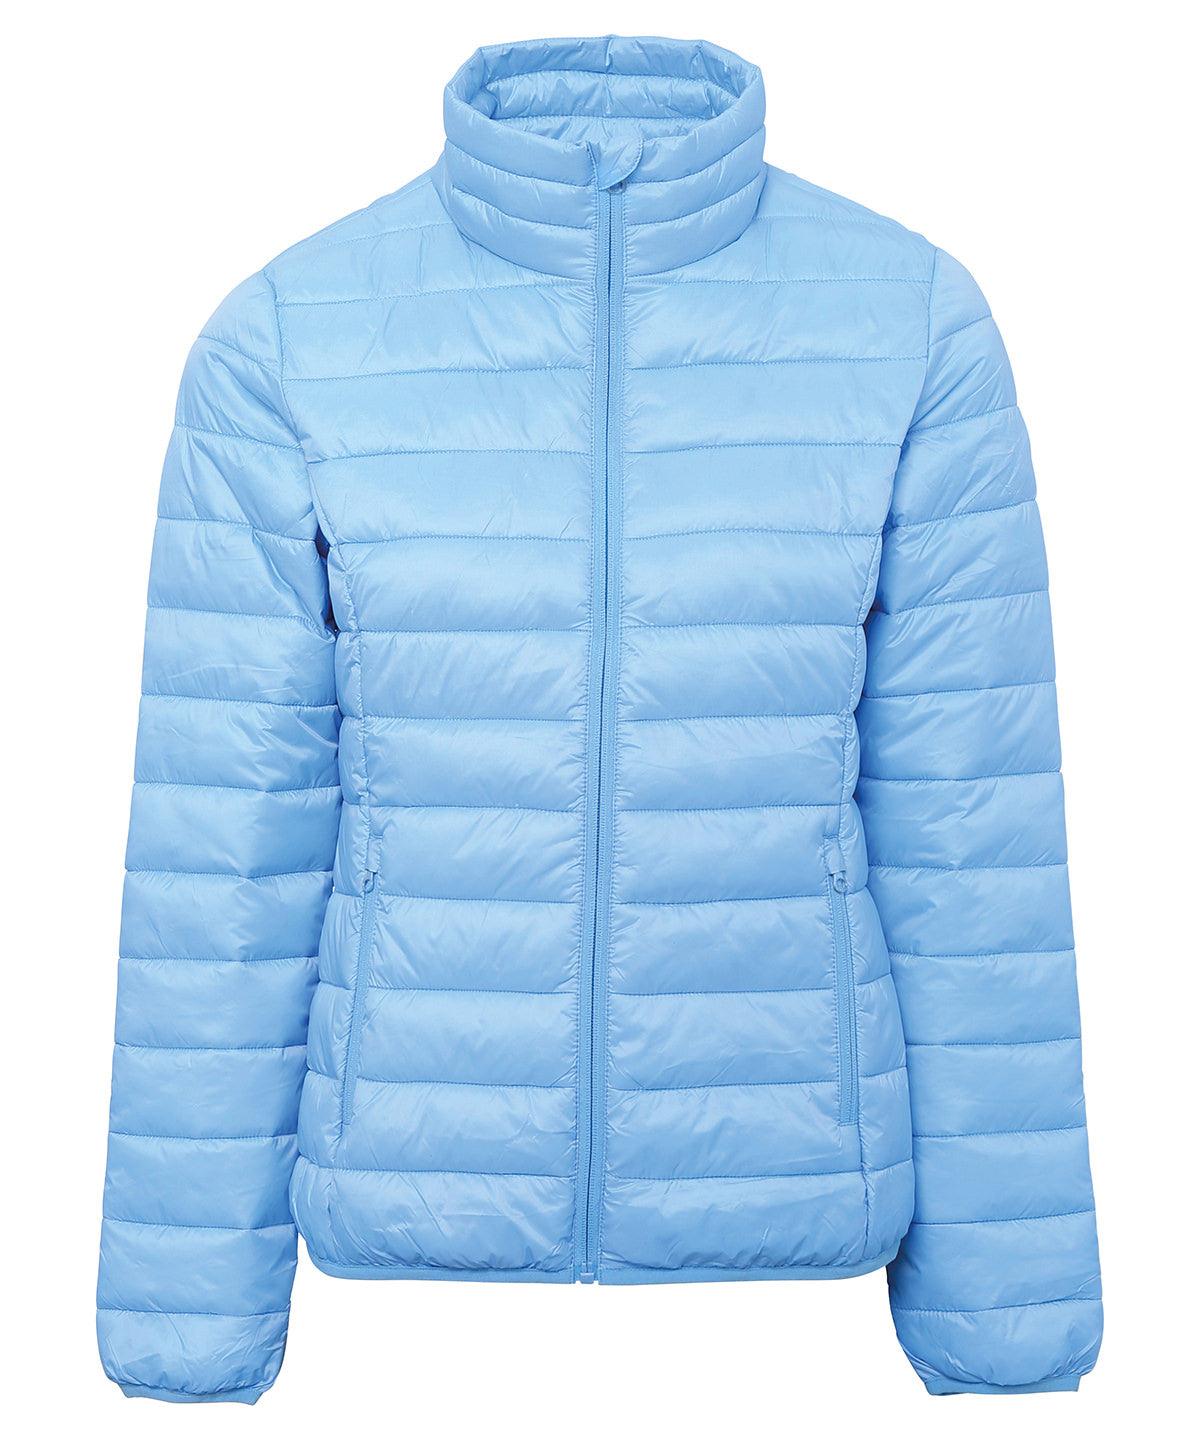 Winter Sky - Women's terrain padded jacket Jackets 2786 Jackets & Coats, Must Haves, Padded & Insulation, Padded Perfection, Women's Fashion Schoolwear Centres